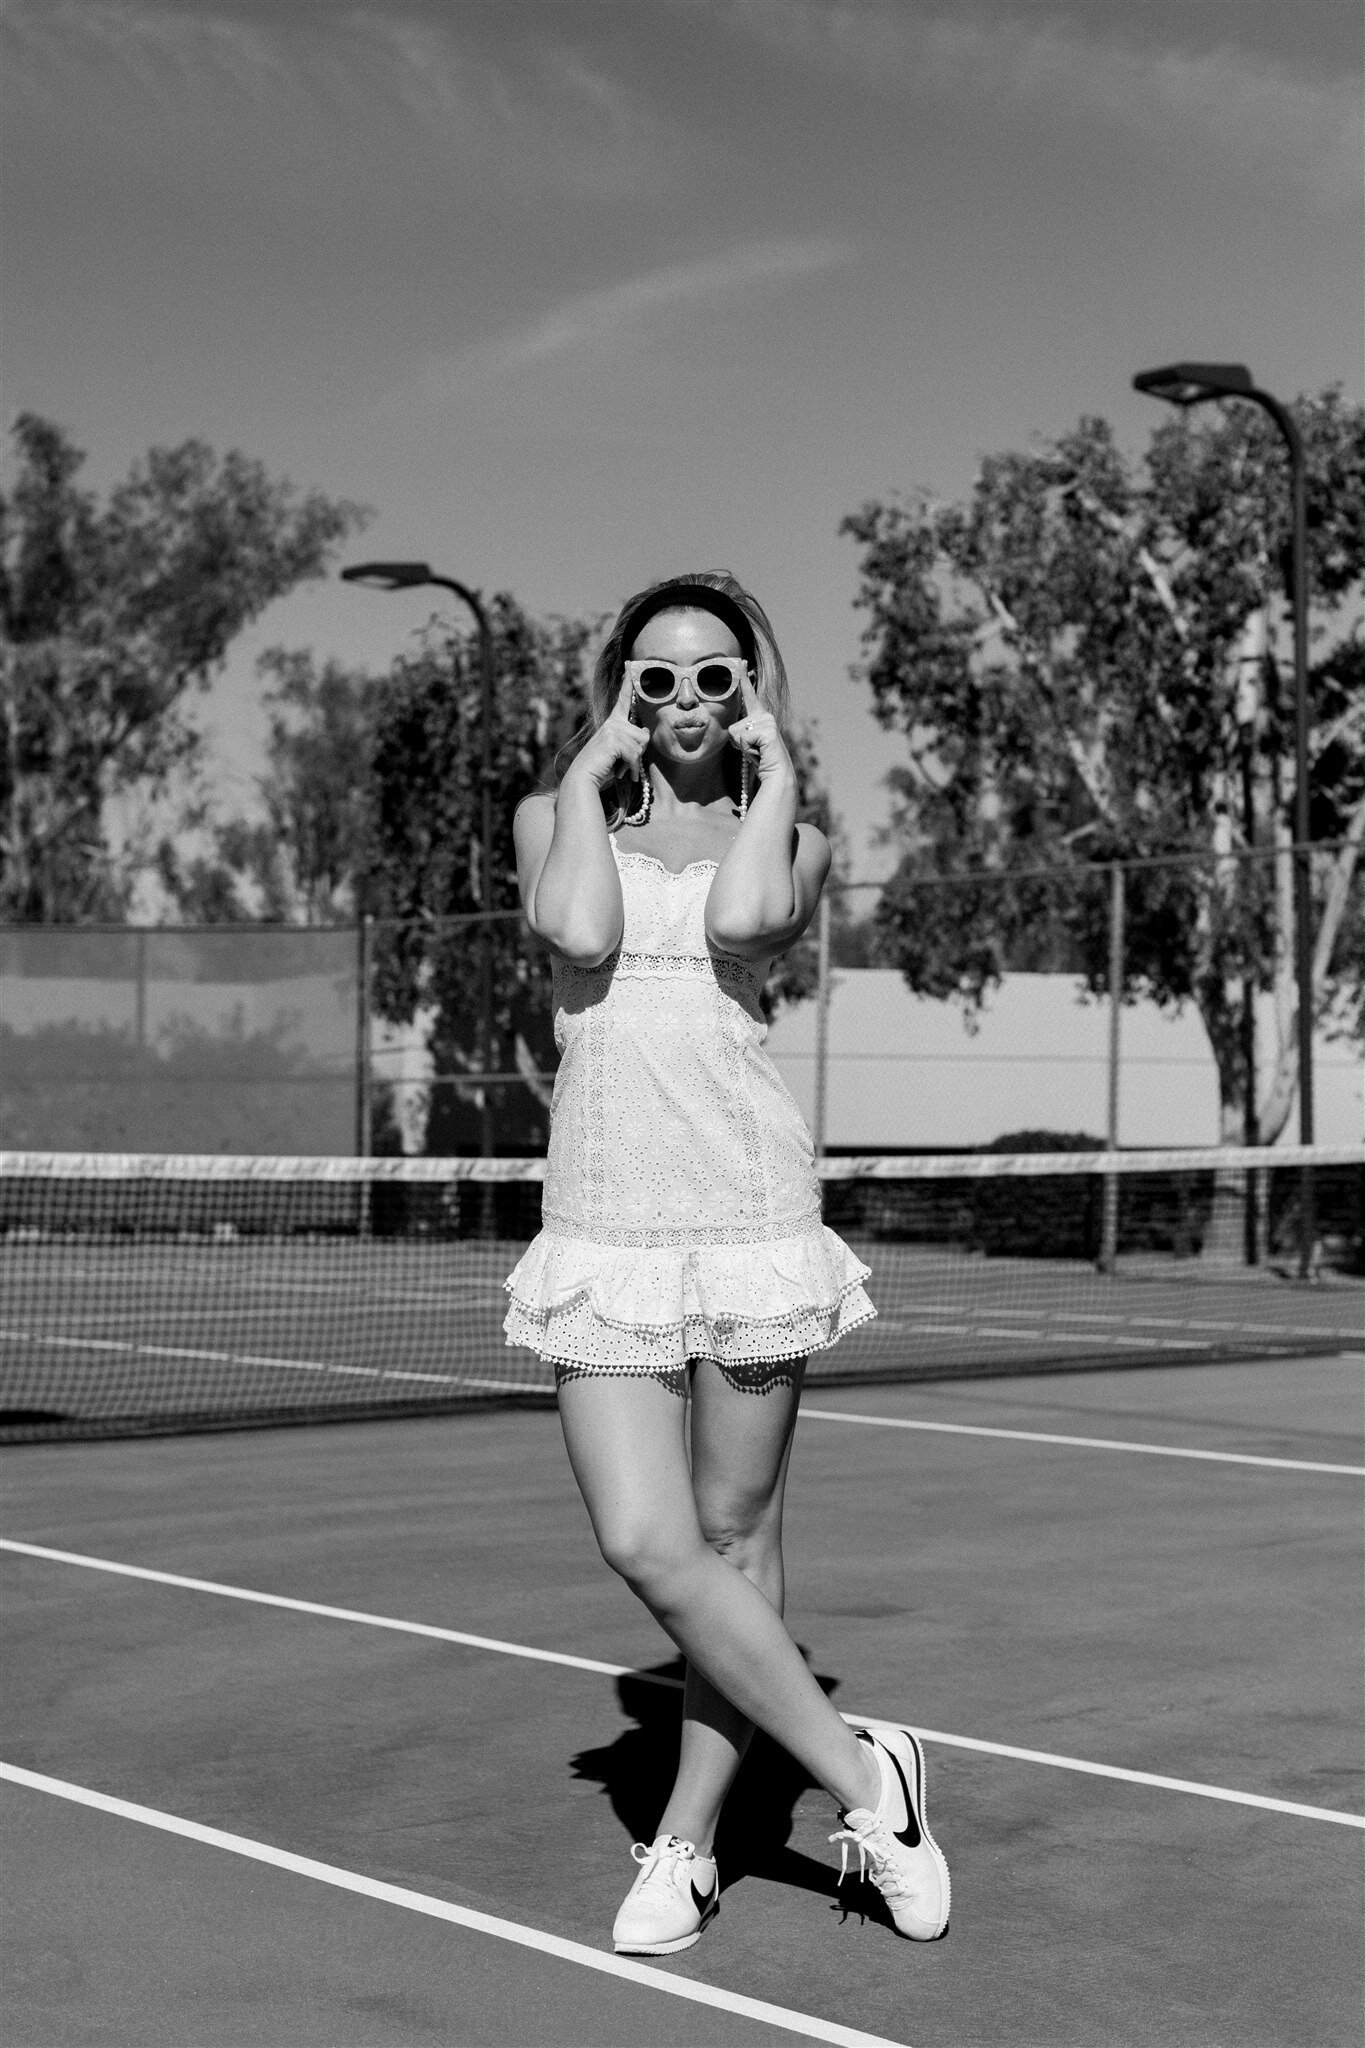 Trace Henningsen Tennis-Valorie Darling Photography-DF1A9748-2